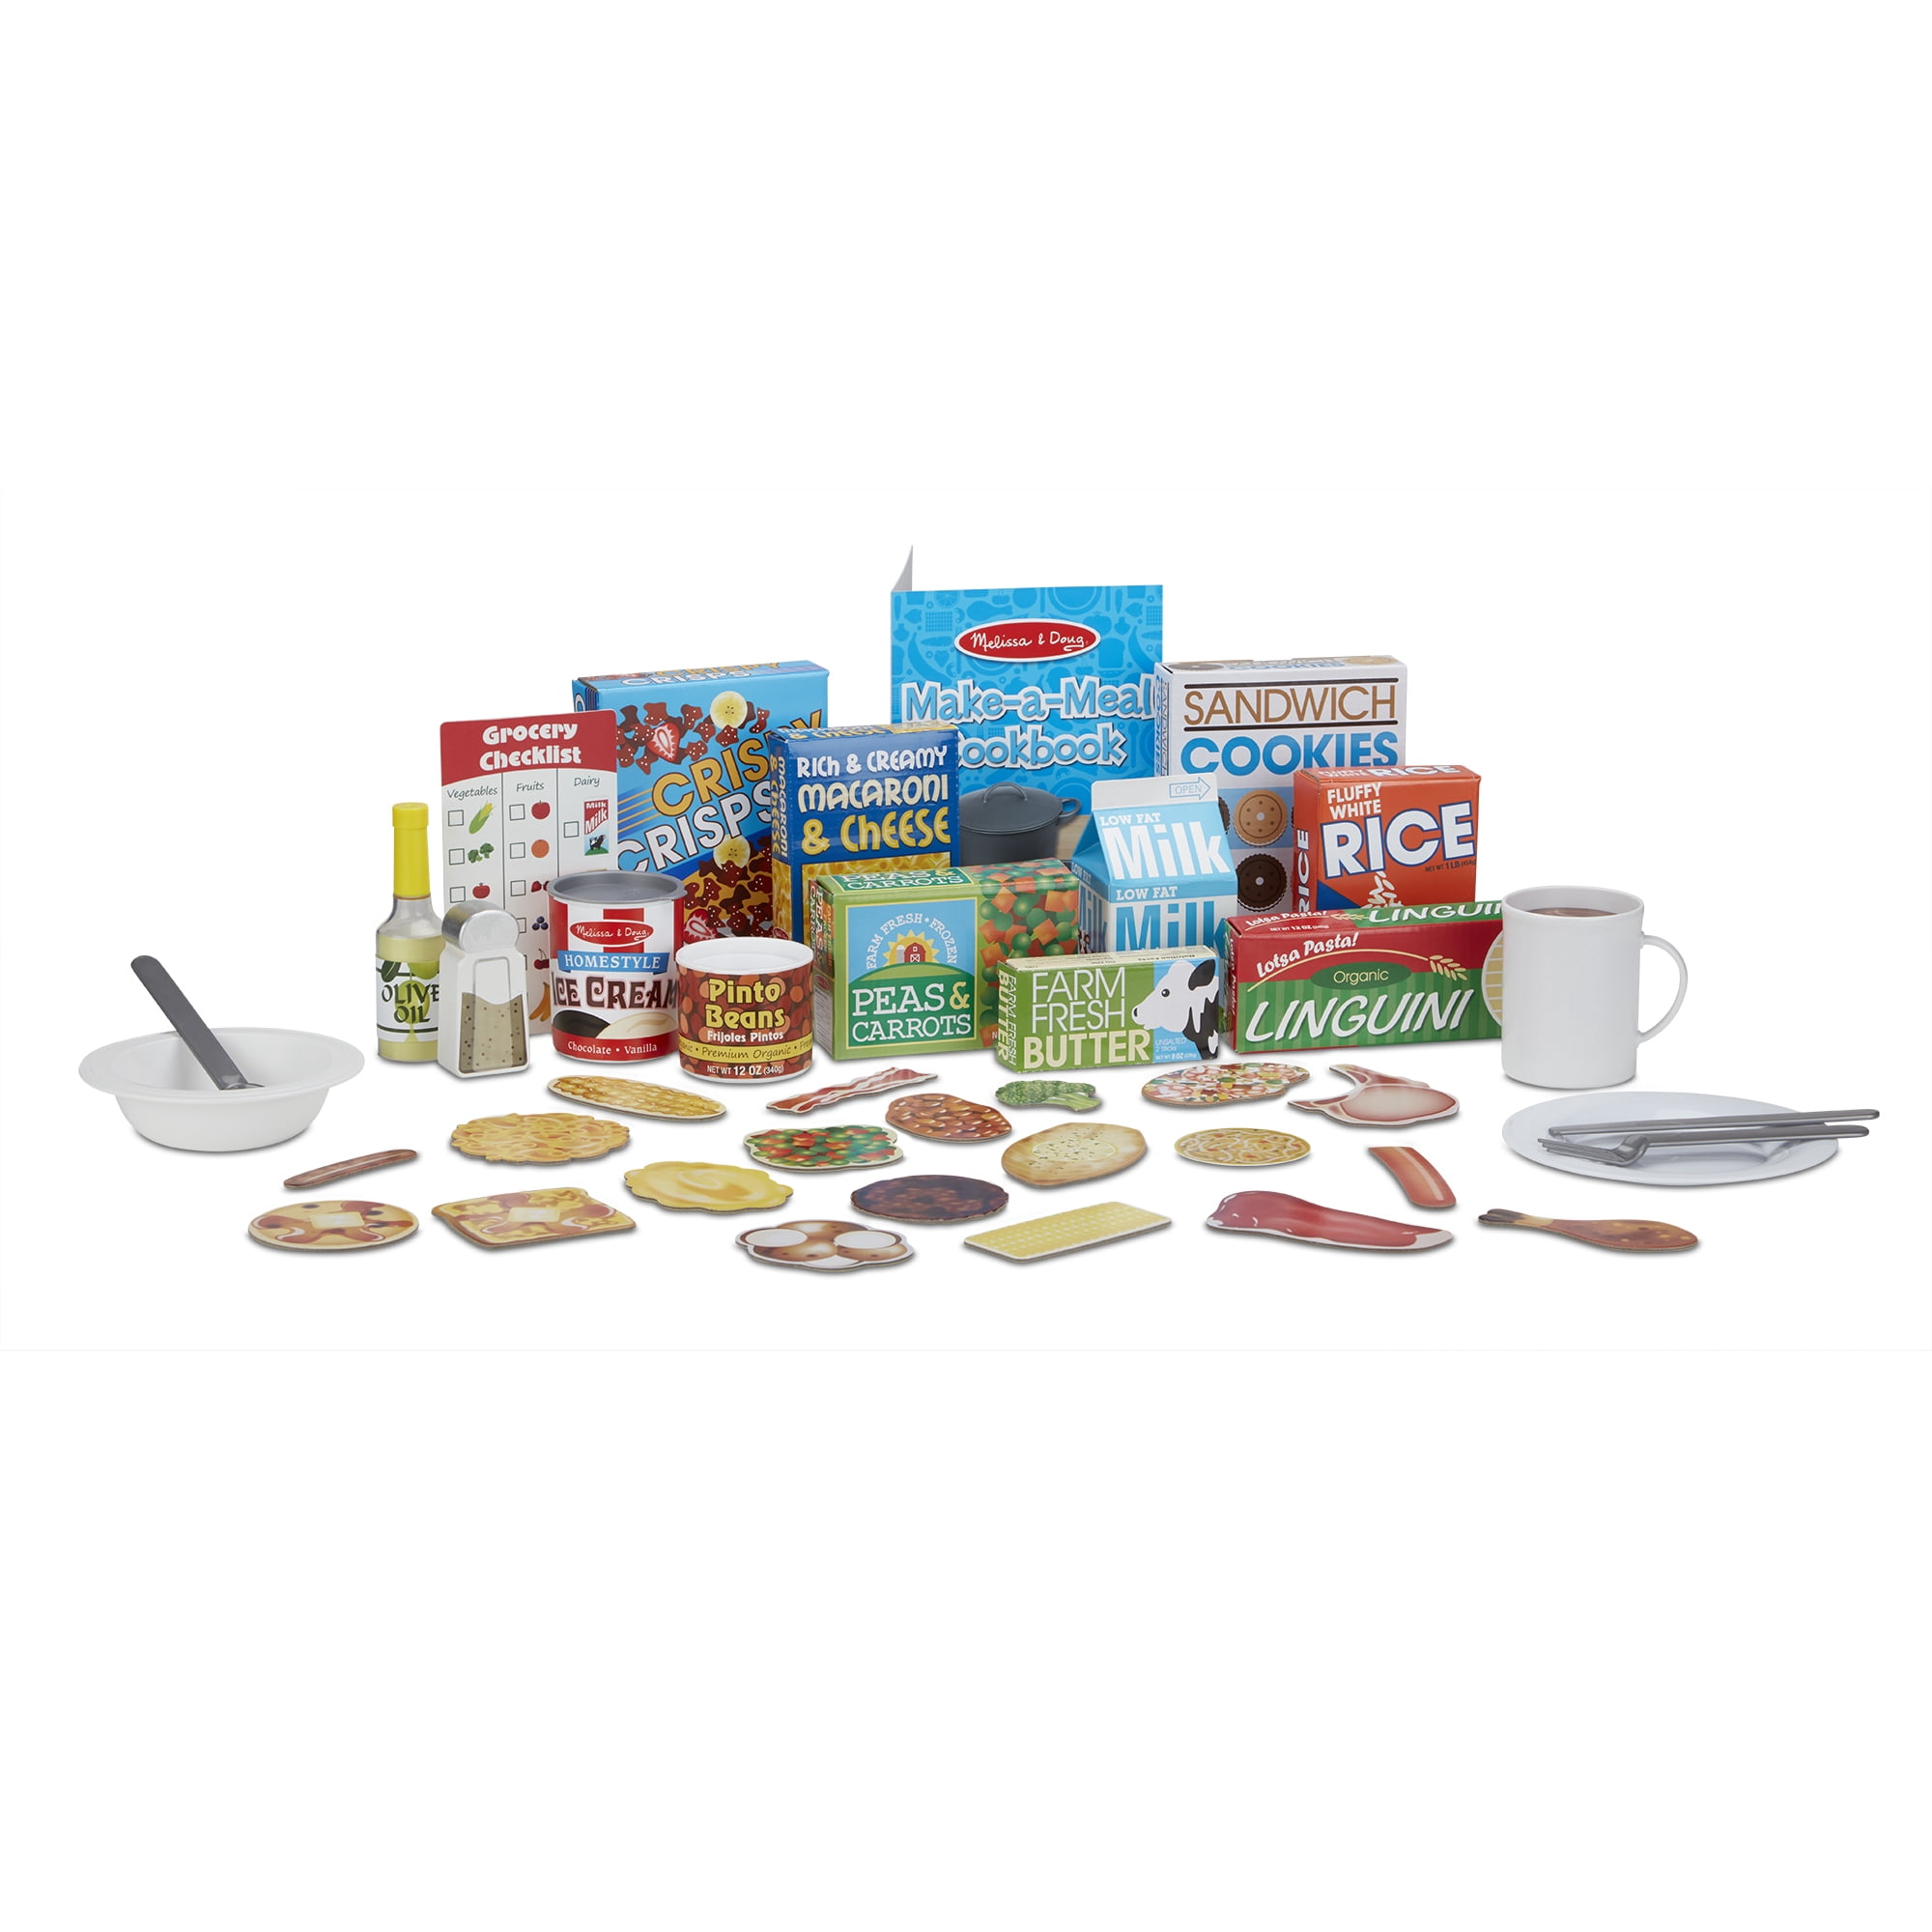 Melissa & Doug Deluxe Kitchen Collection Cooking & Play Food Set